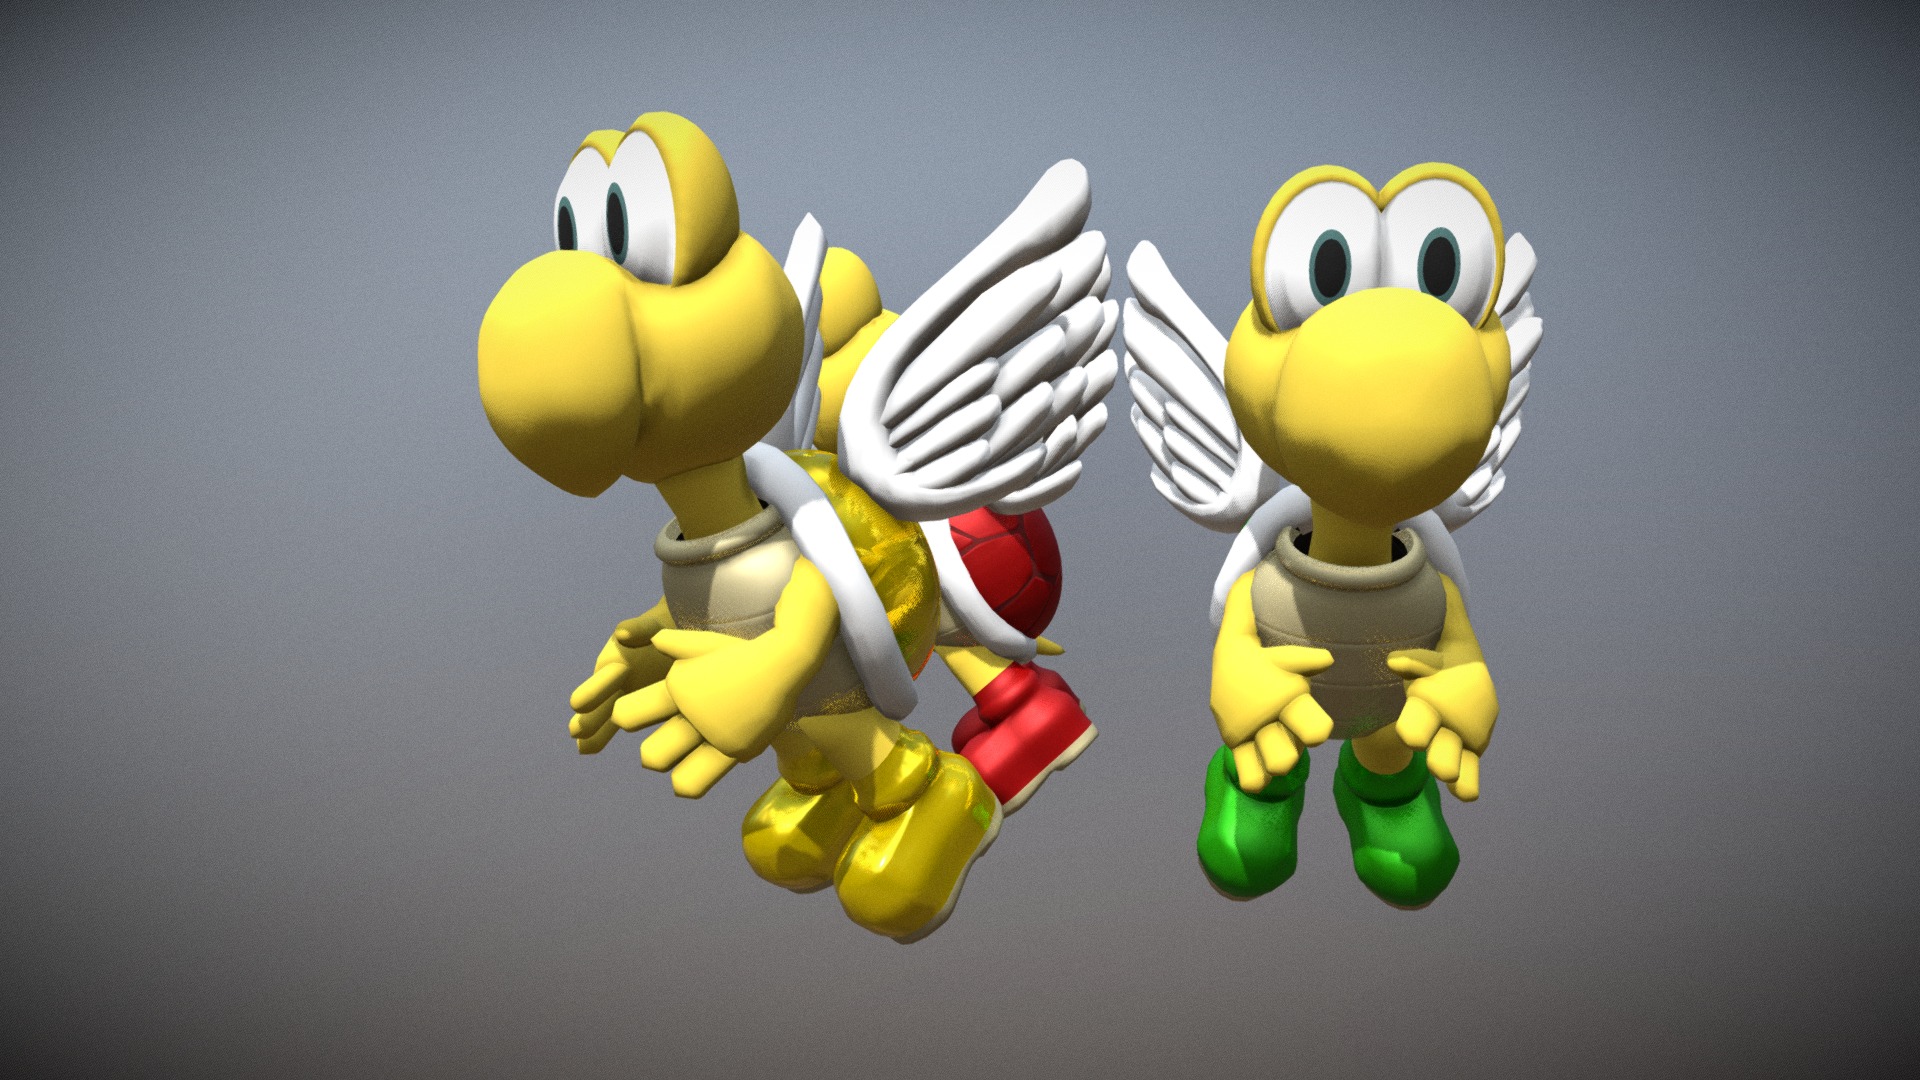 Koopa Paratroopas (also know as Para-Koopas, Sky Troopas in Super Mario RPG: Legned of the Seven Stars, or simply Paratroopas) are winged Koopa Troopas 3d model